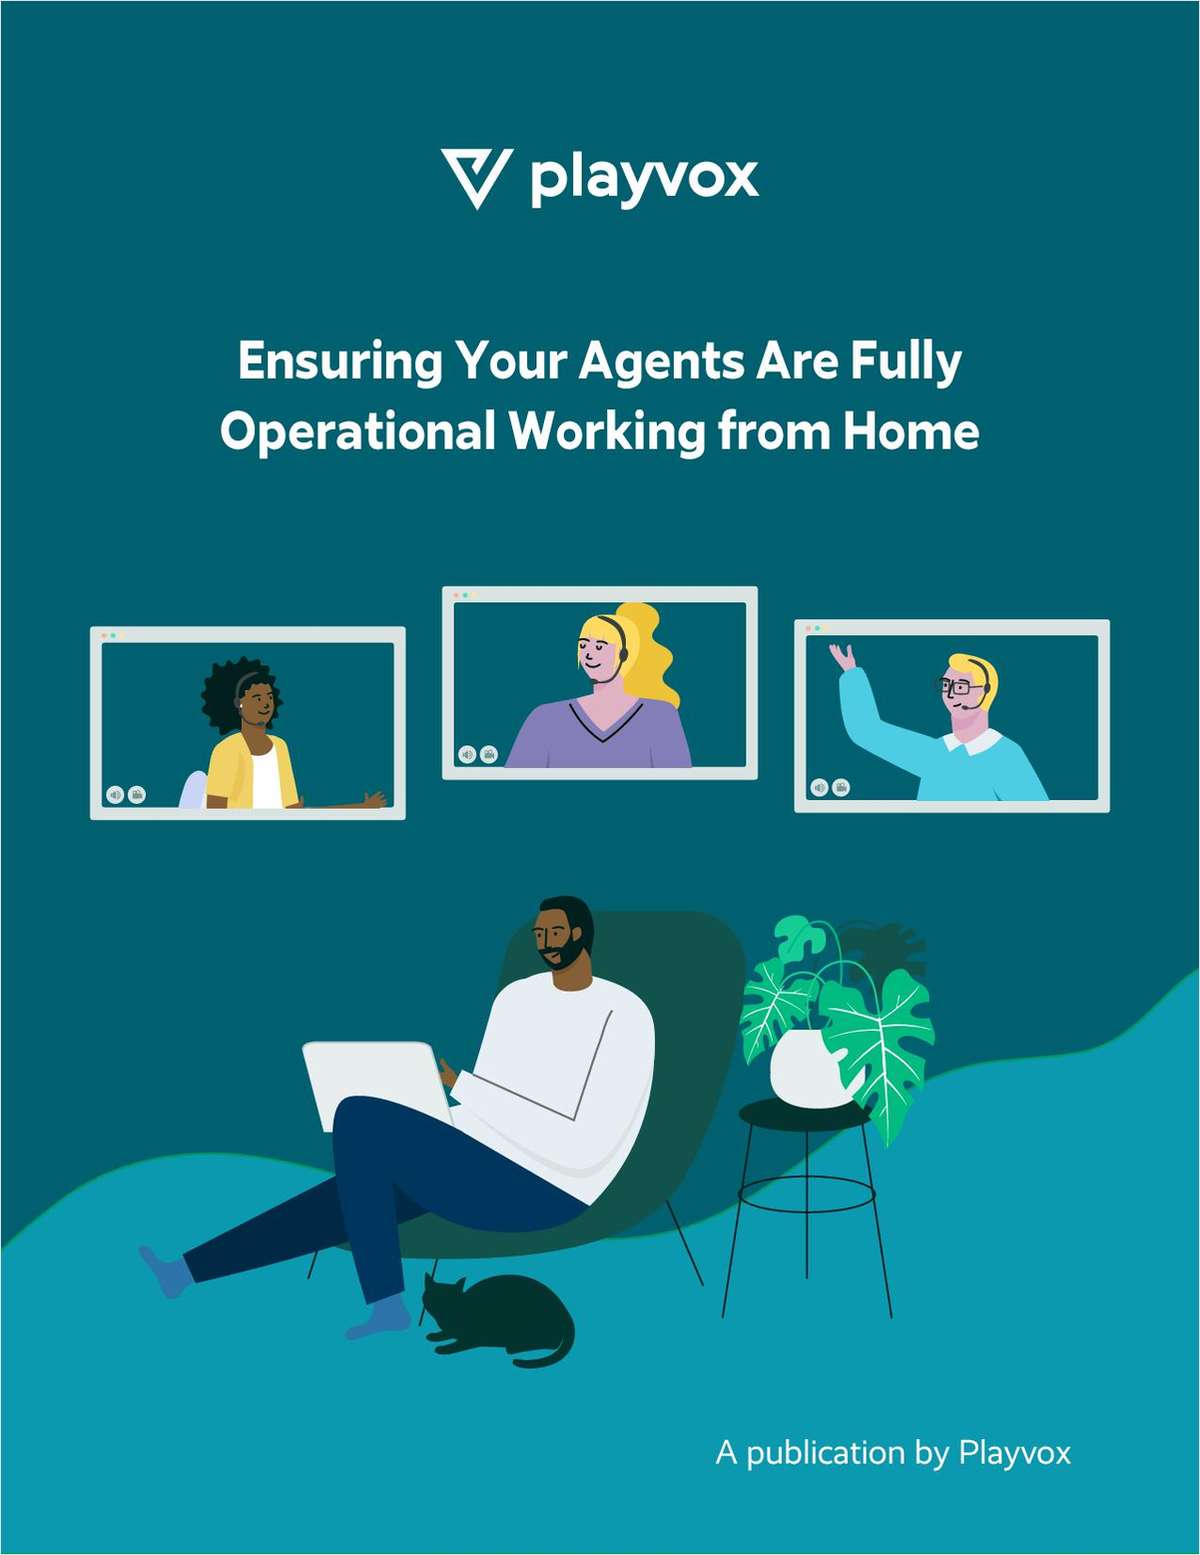 Ensuring Your Agents are Fully Operational Working from Home